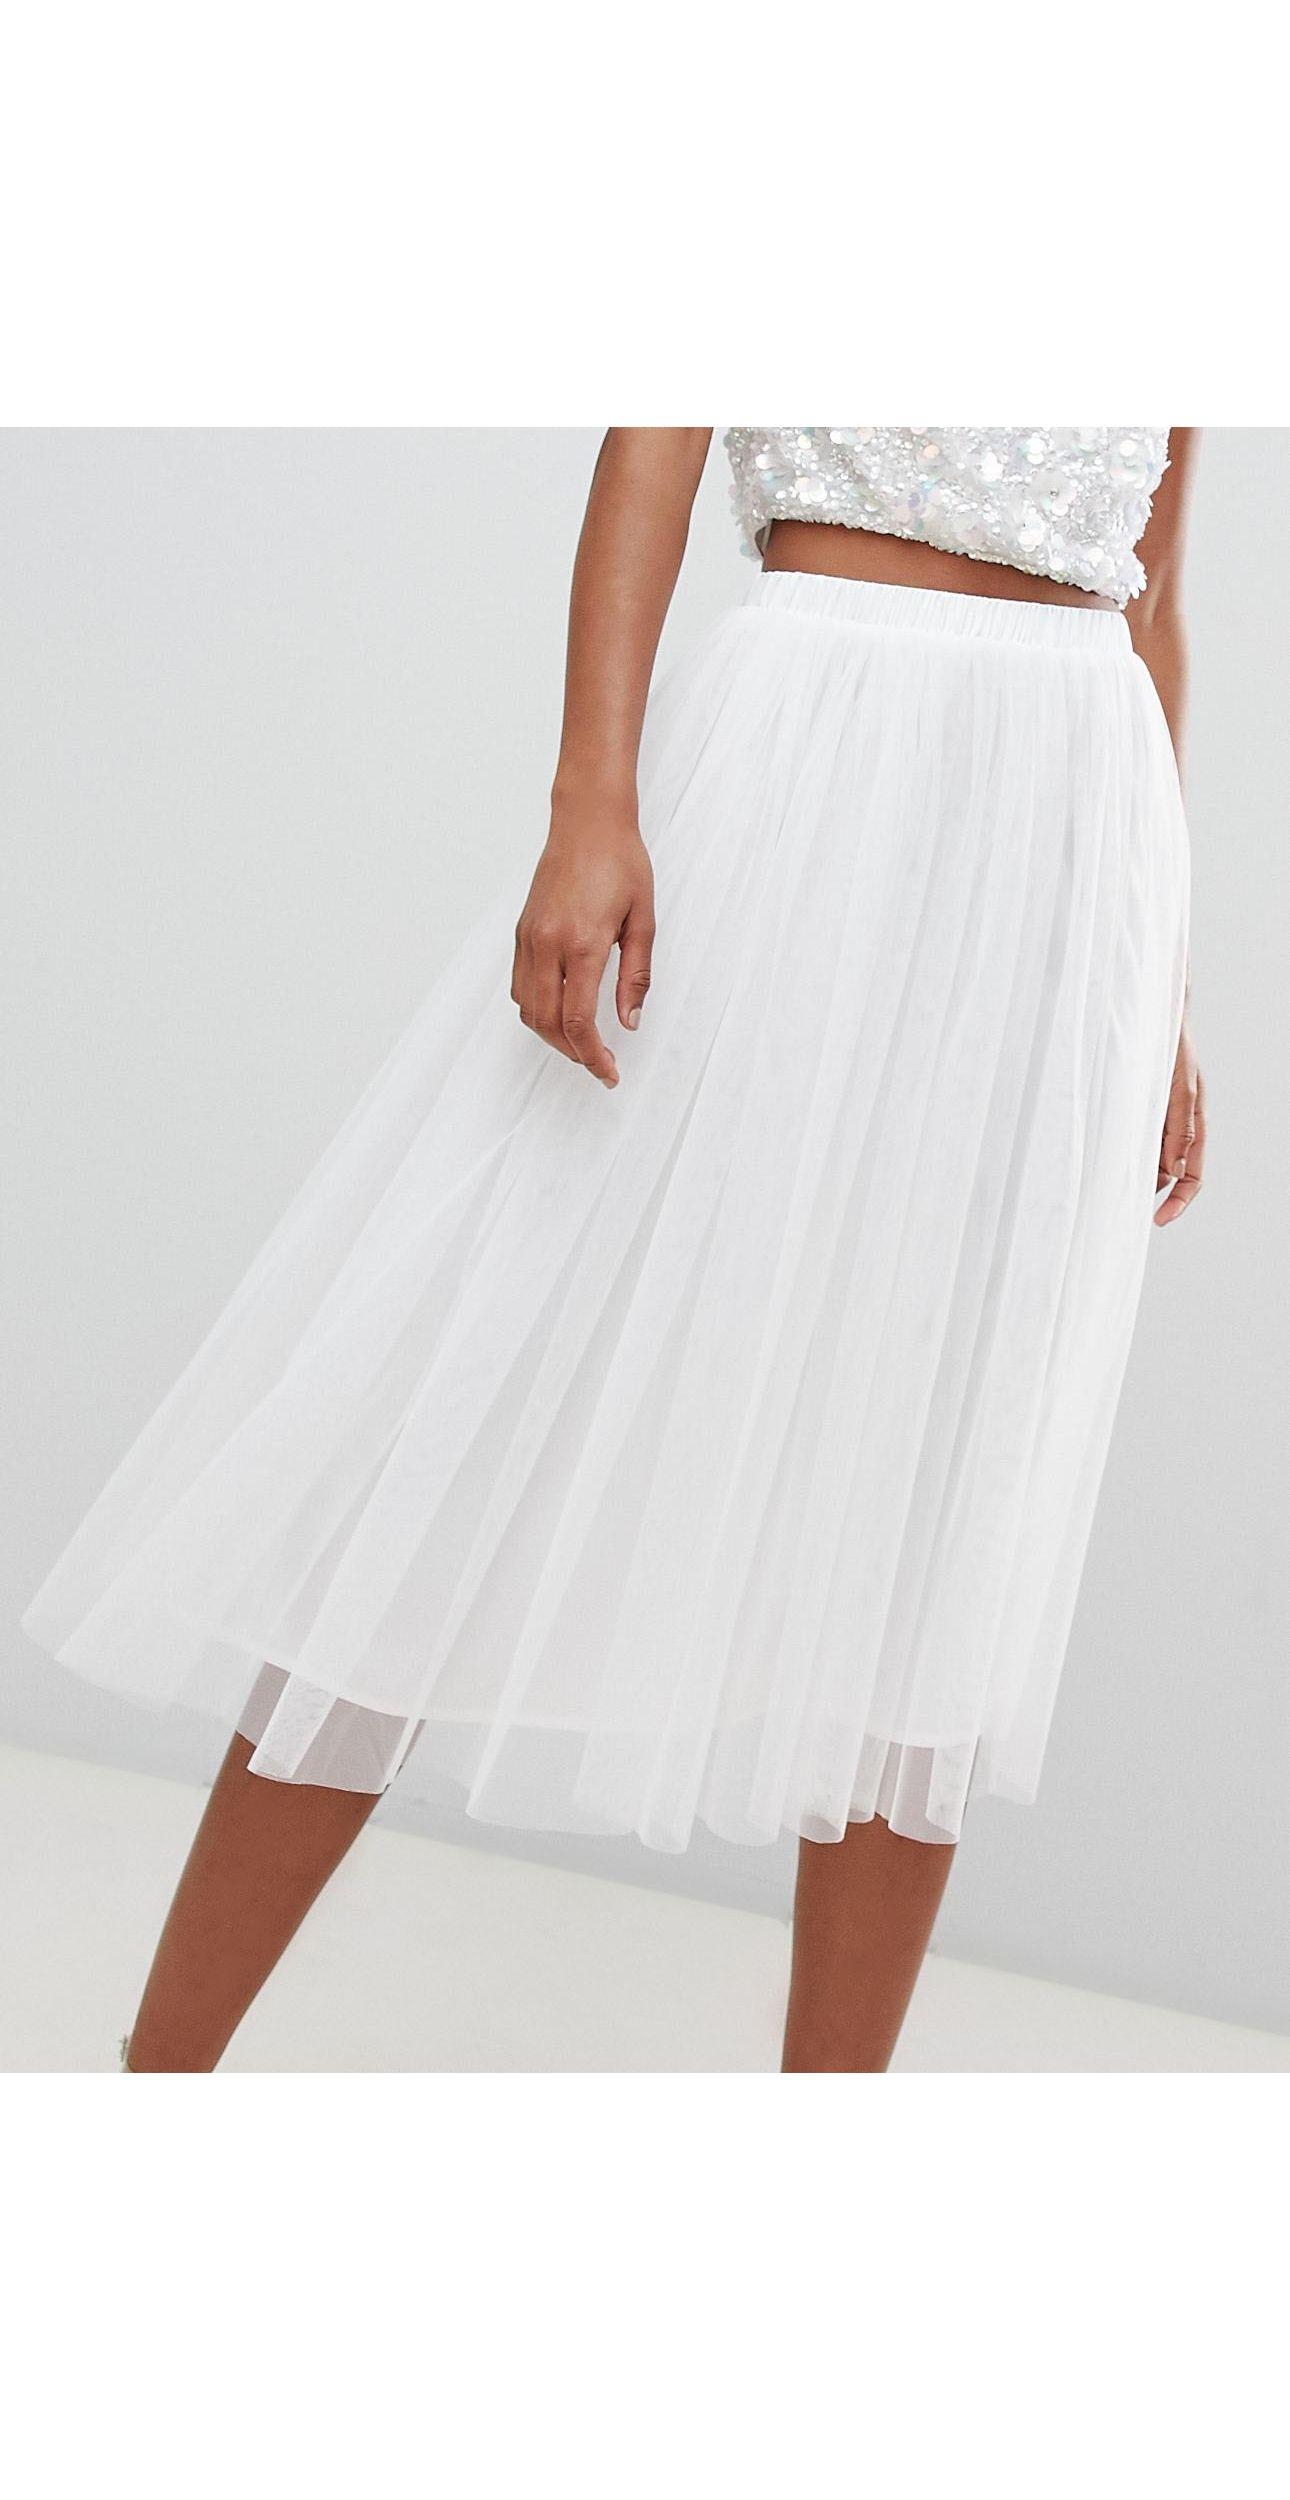 LACE & BEADS Tulle Midi Skirt in White | Lyst